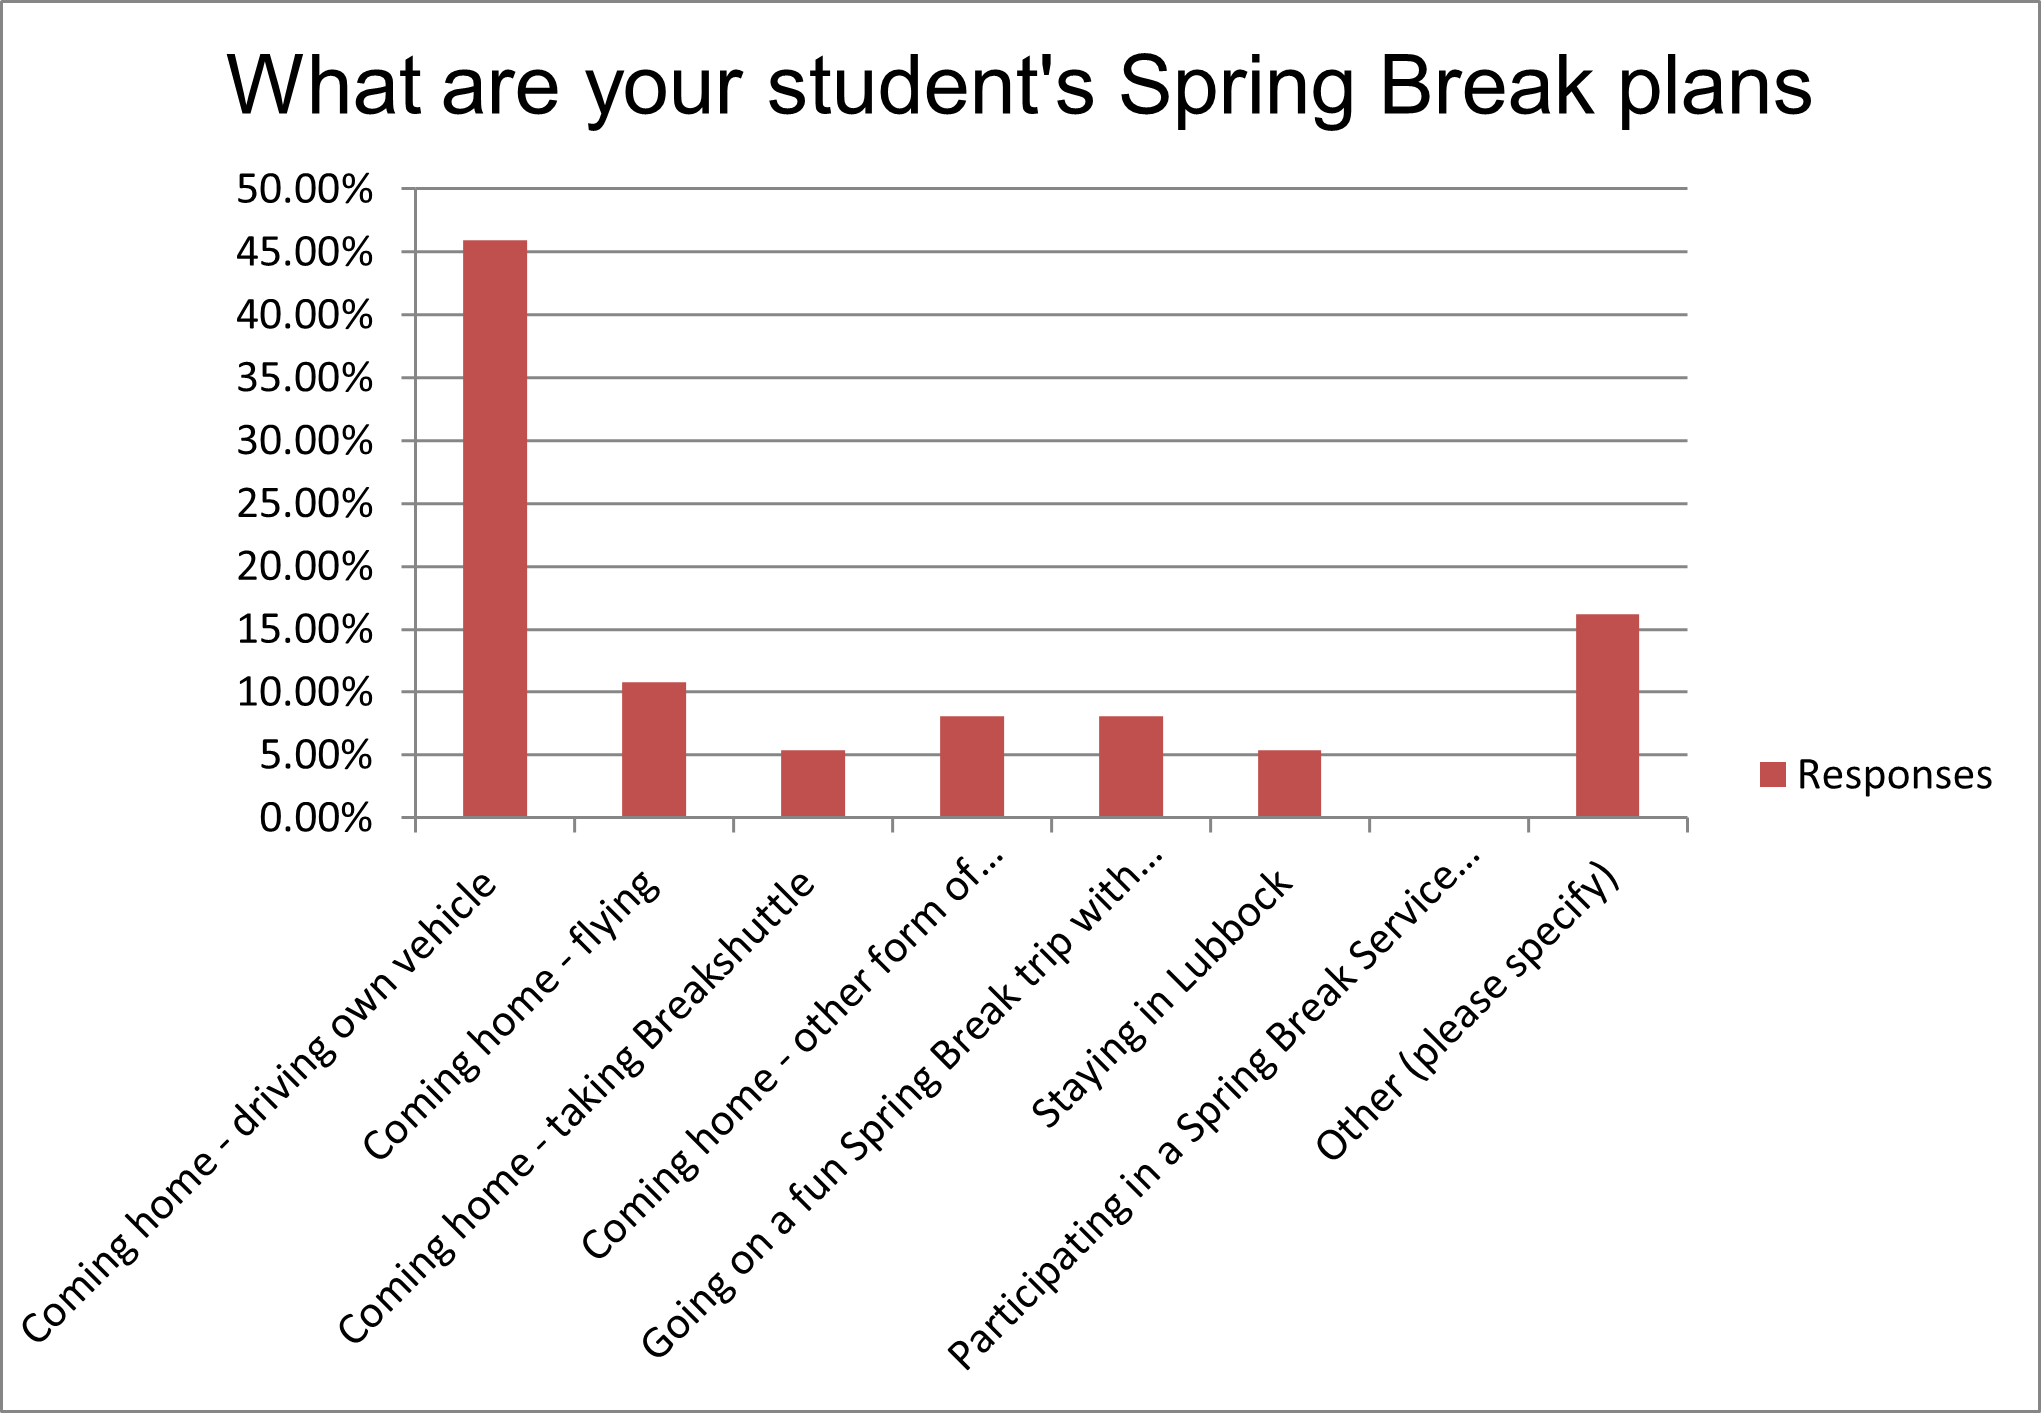 Chart showing survey results about spring break plans